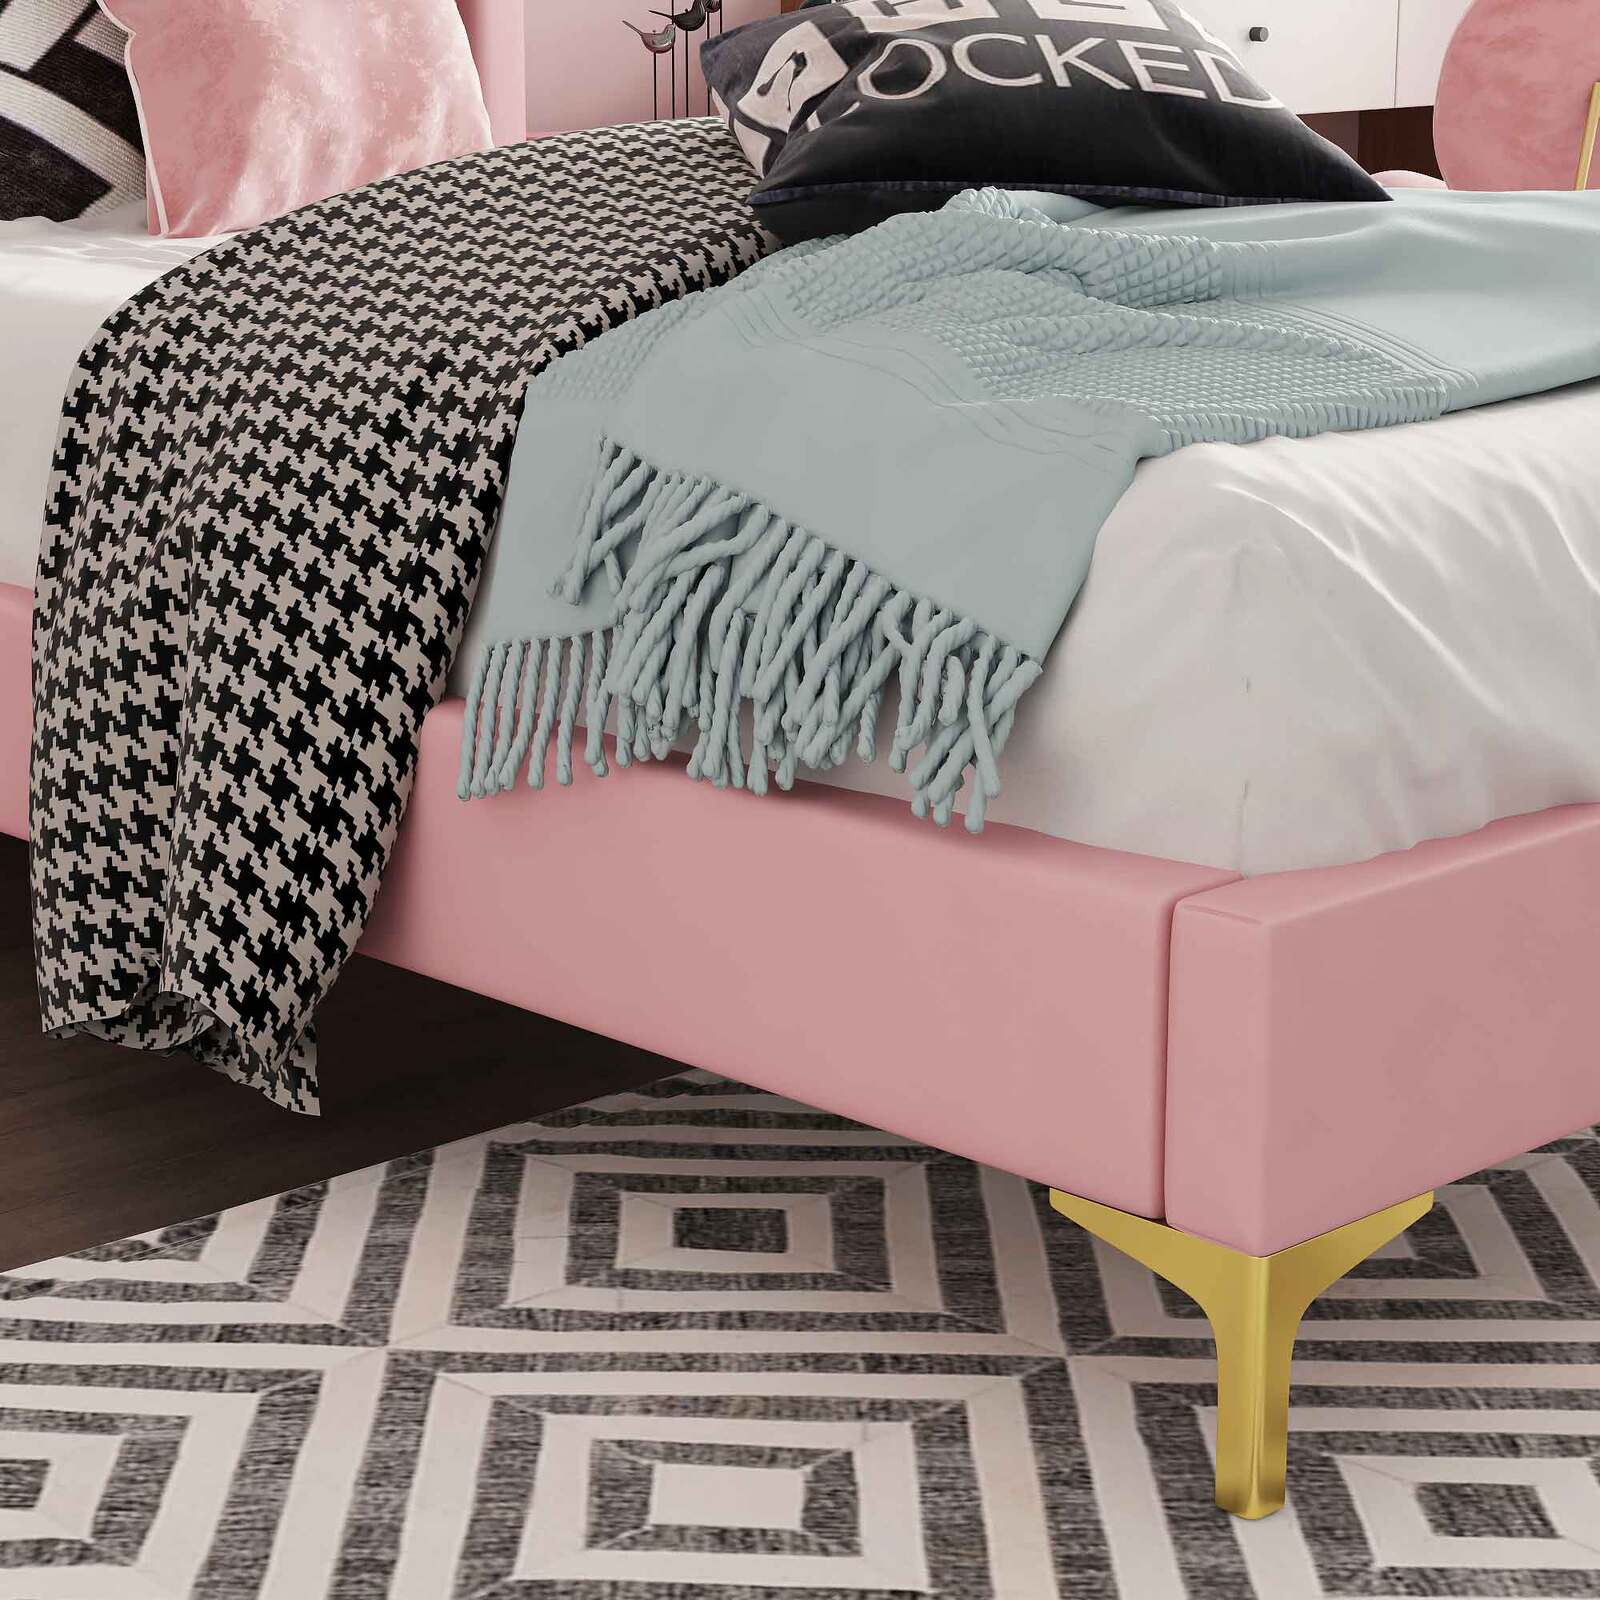 Charlotte King Single Bed Dusty Pink